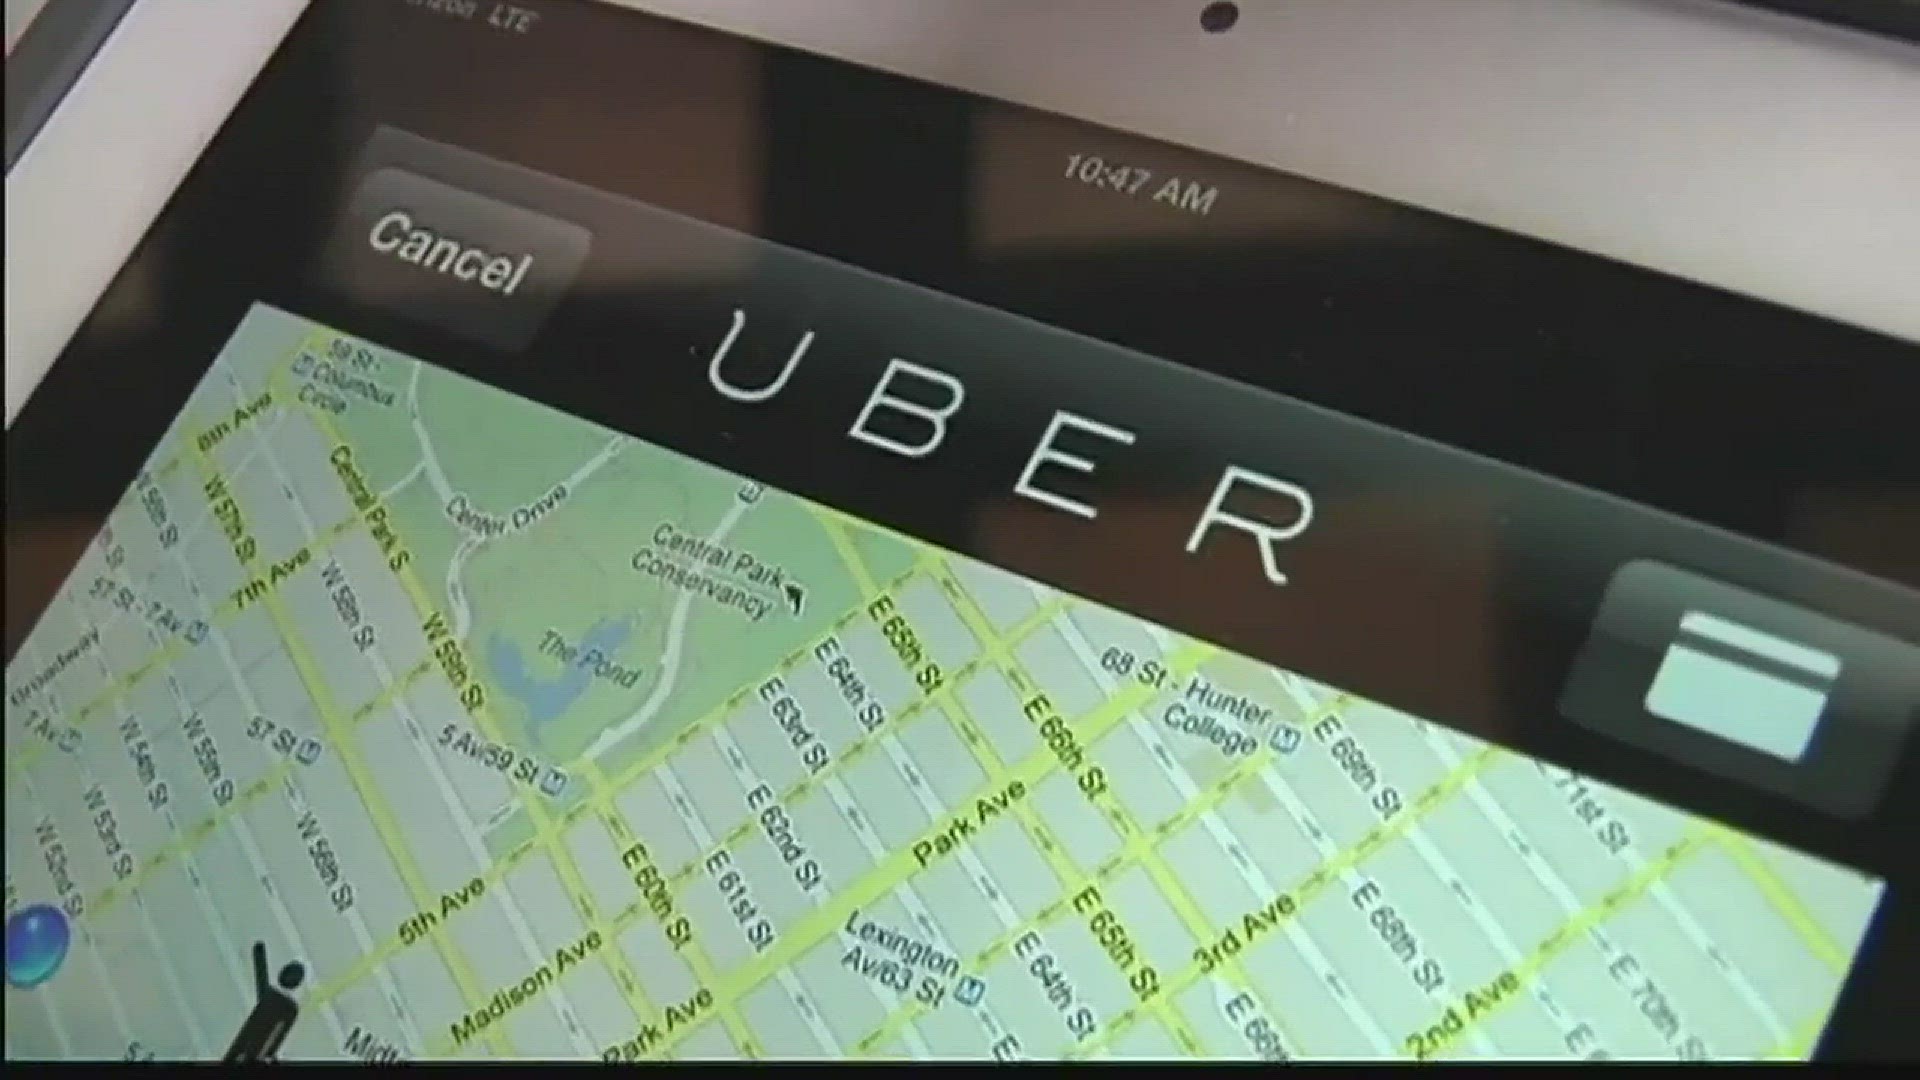 Stephanie Barnes tells us what we can expect today as Uber works its way into WNY